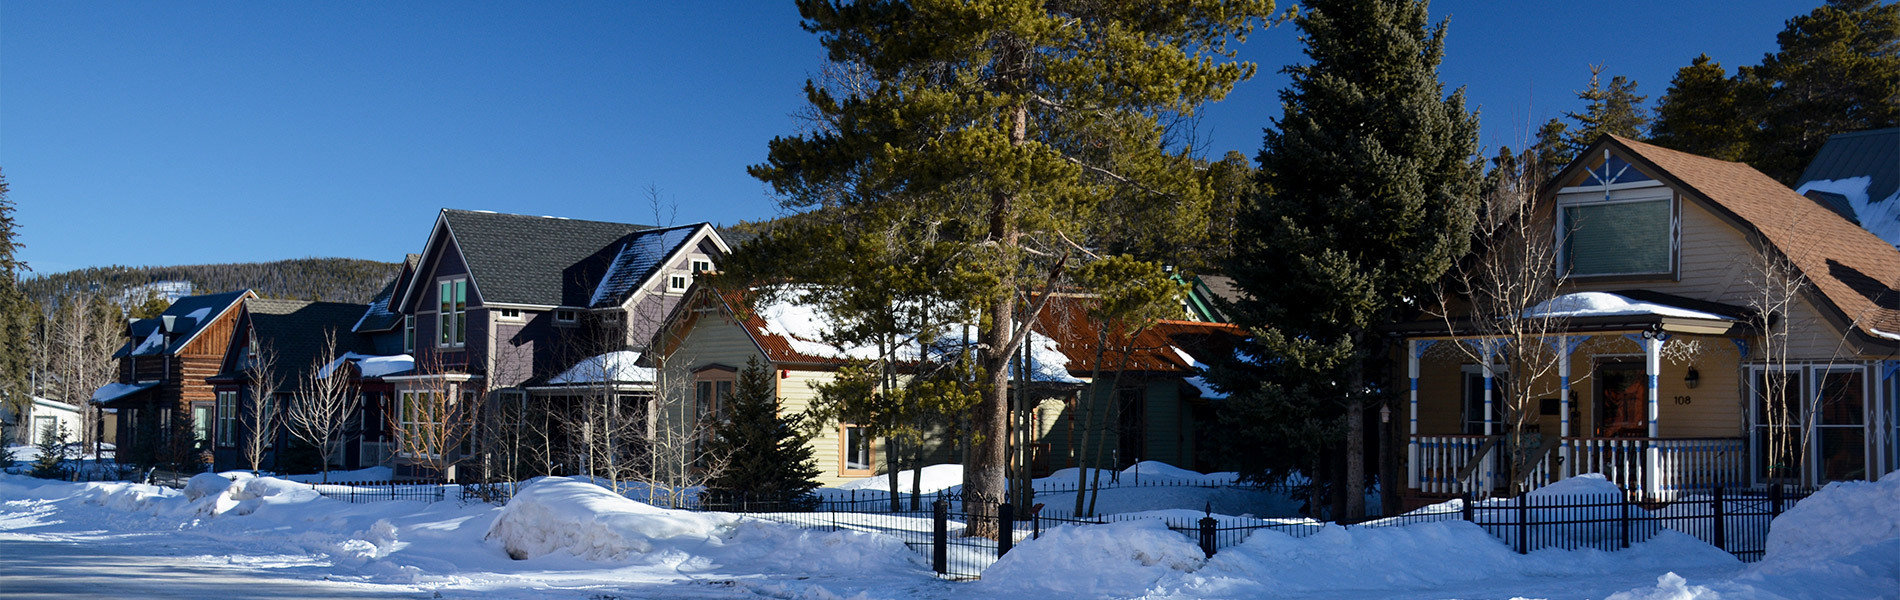 Breckenridge real estate provided by Richard Wallace